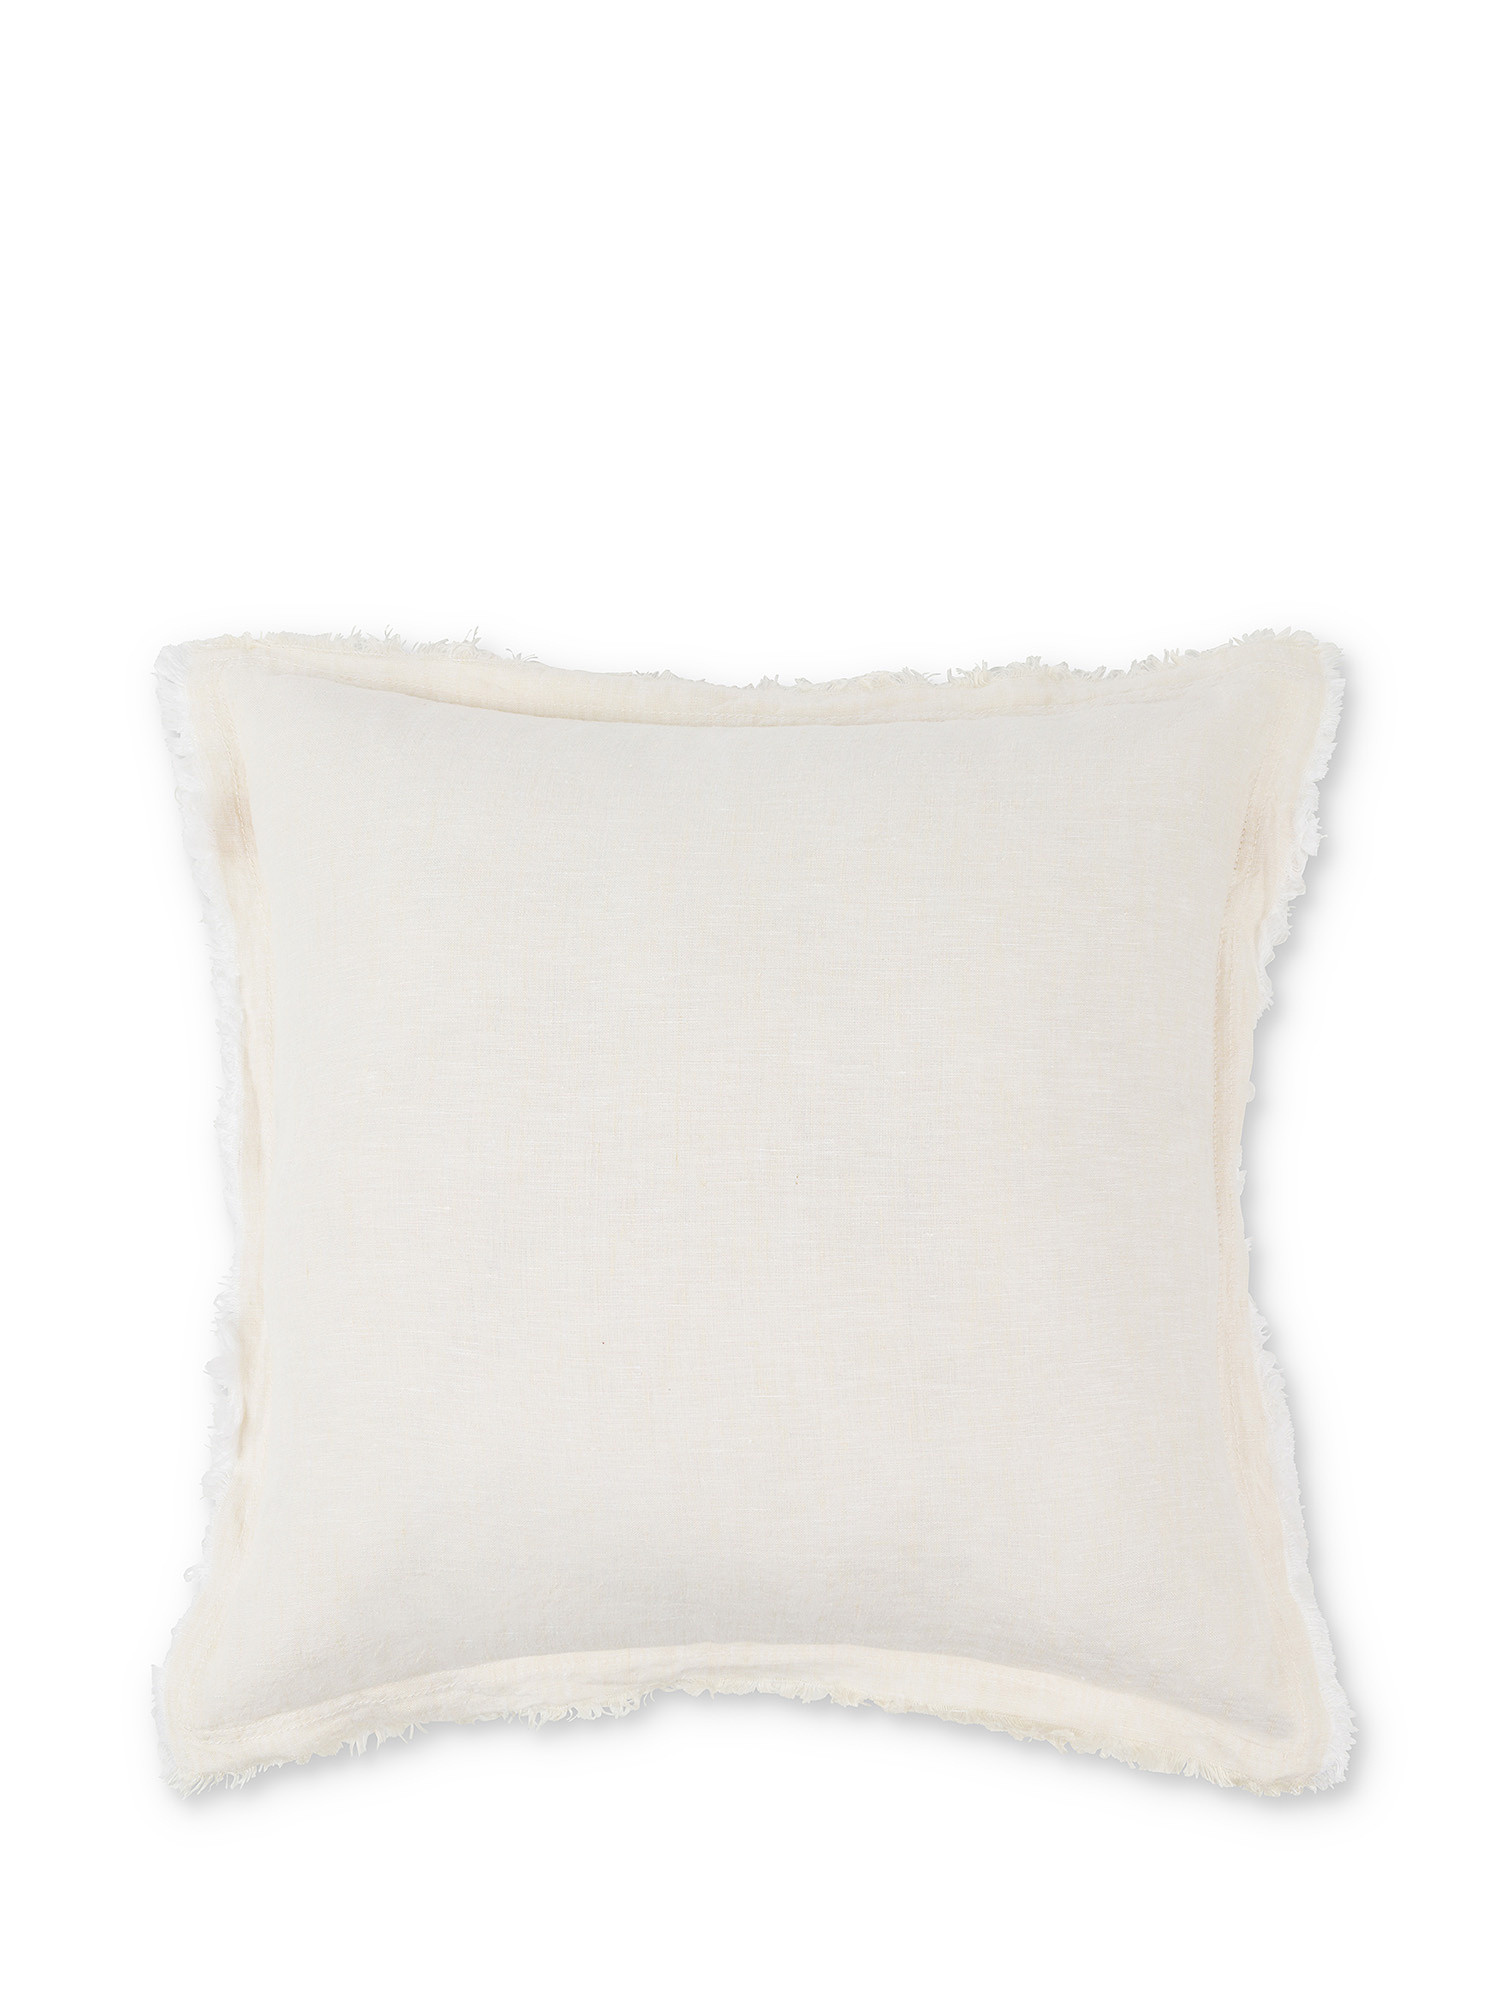 Solid color 100% linen cushion 45x45cm, White, large image number 0